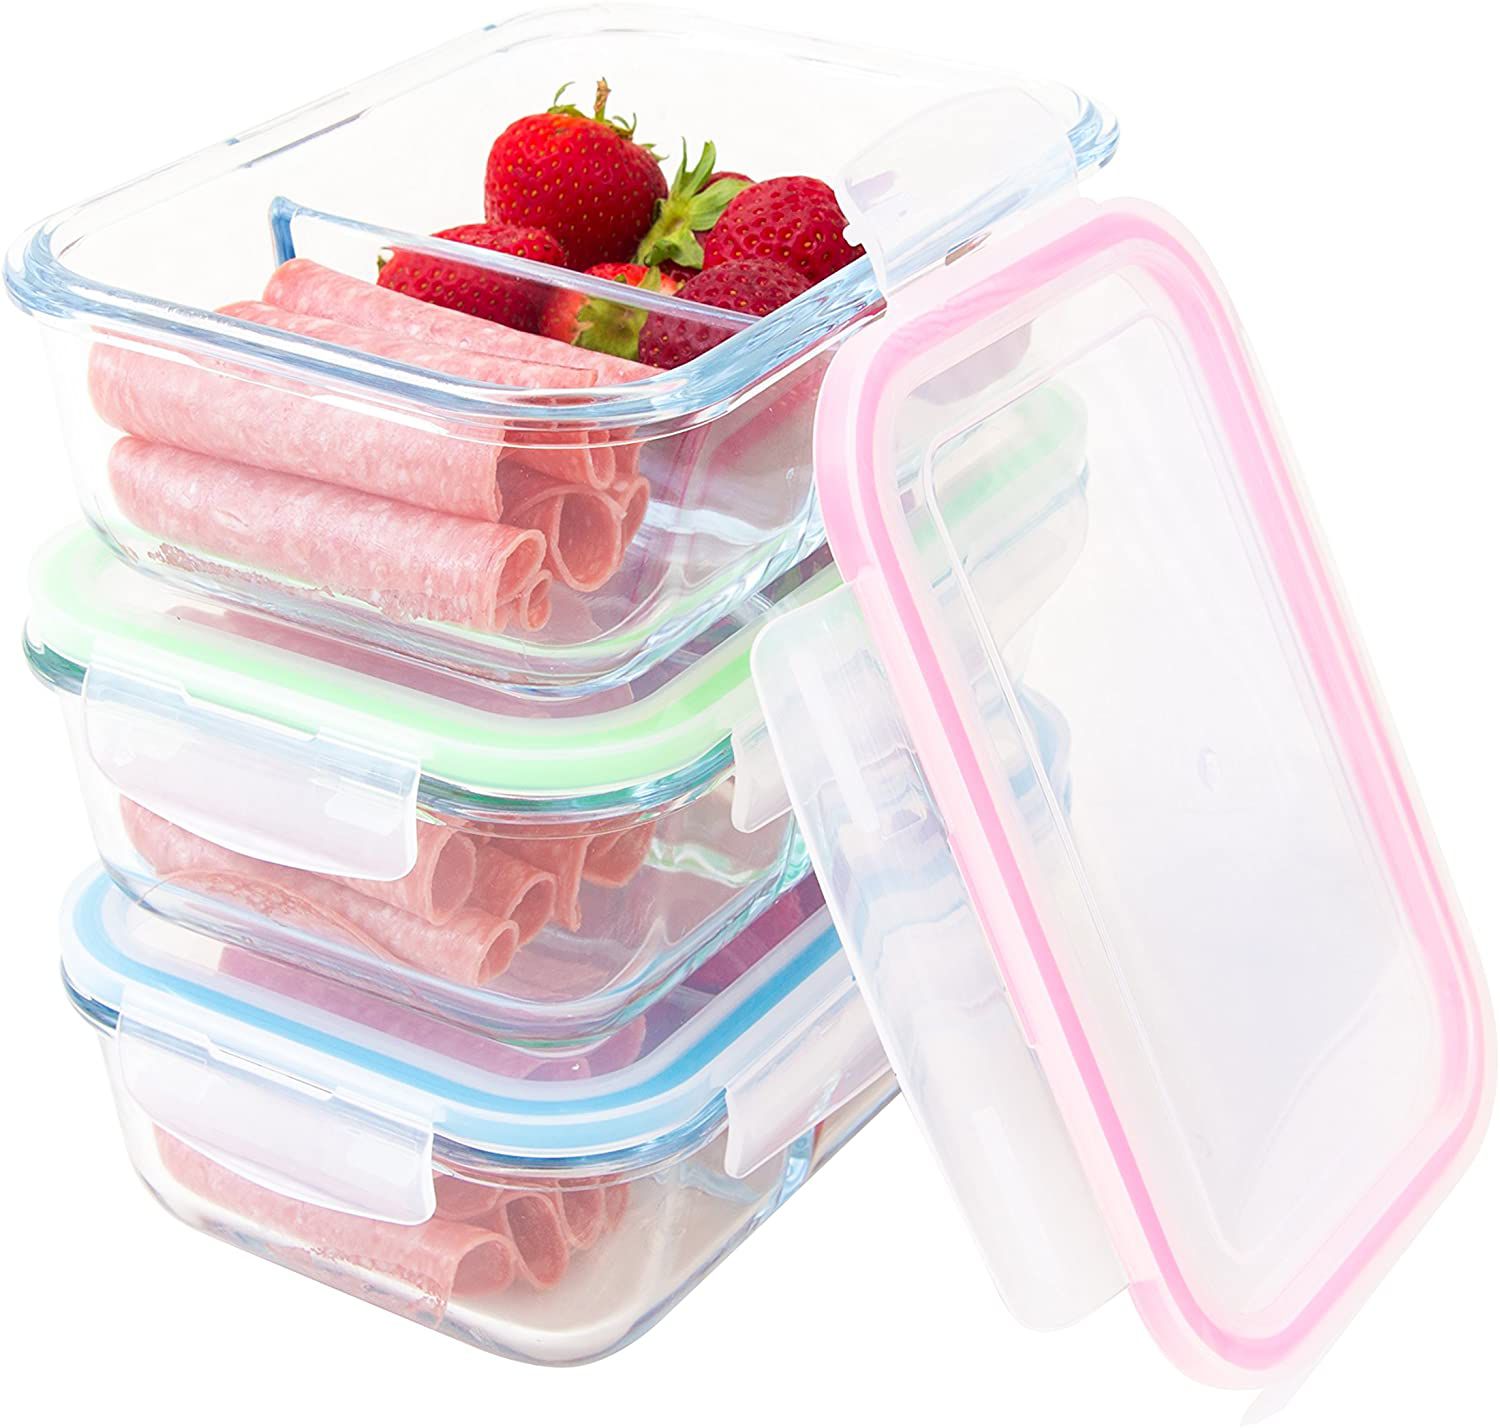 Glass Food Storage 2 Compartment Containers - Meal Prep Container Set with BPA-Free Airtight Locking Lids - Oven Microwave Freezer Safe - Portion Cont